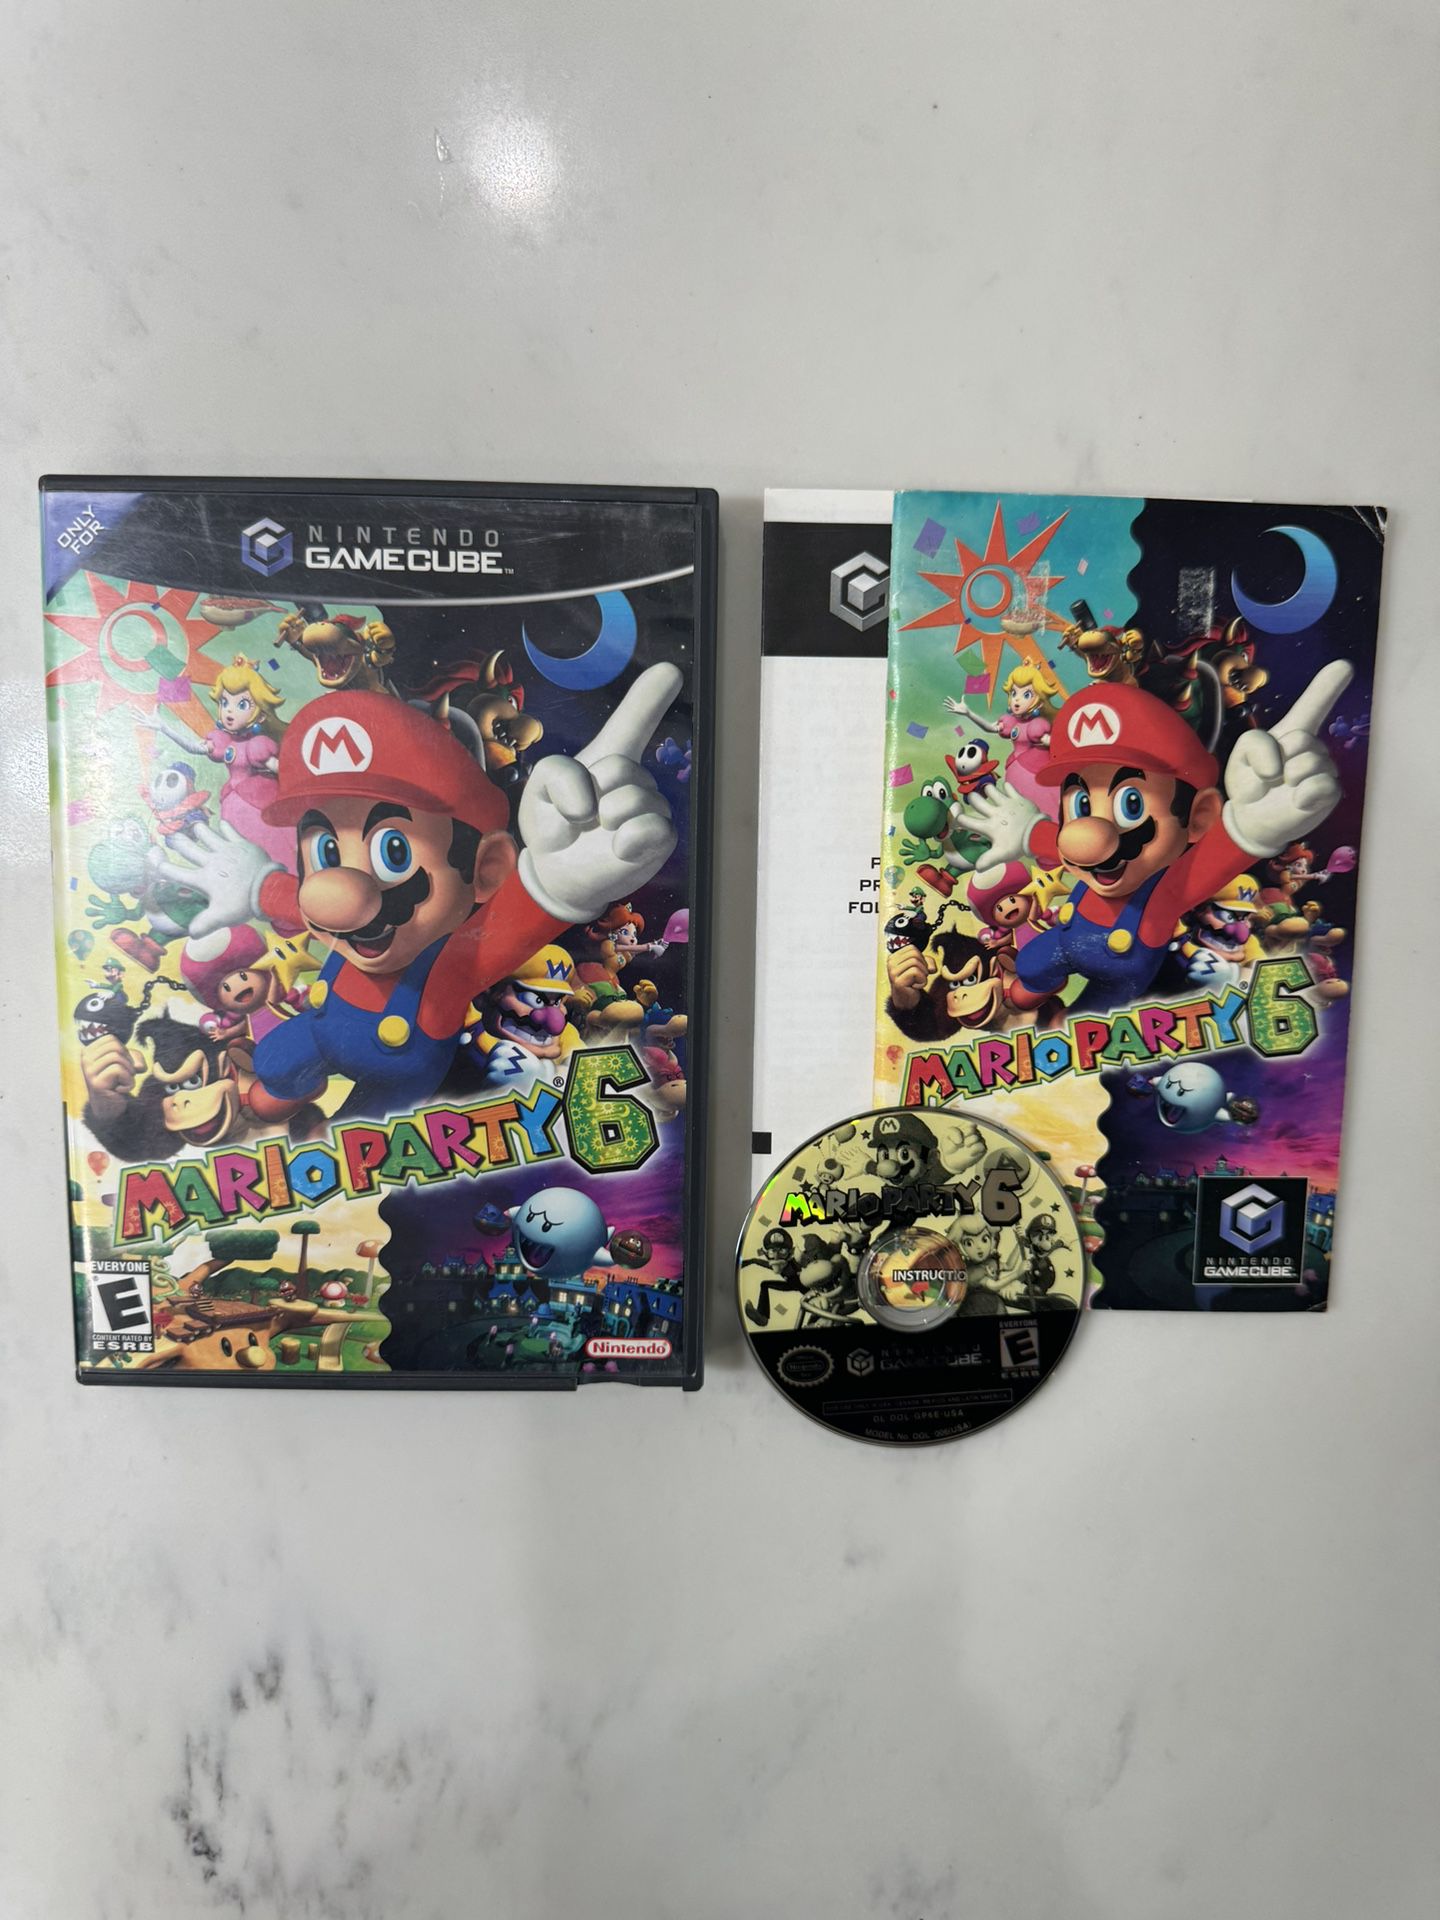 Mario Party 6 Scratch-Less Disc for Nintendo GameCube GAME